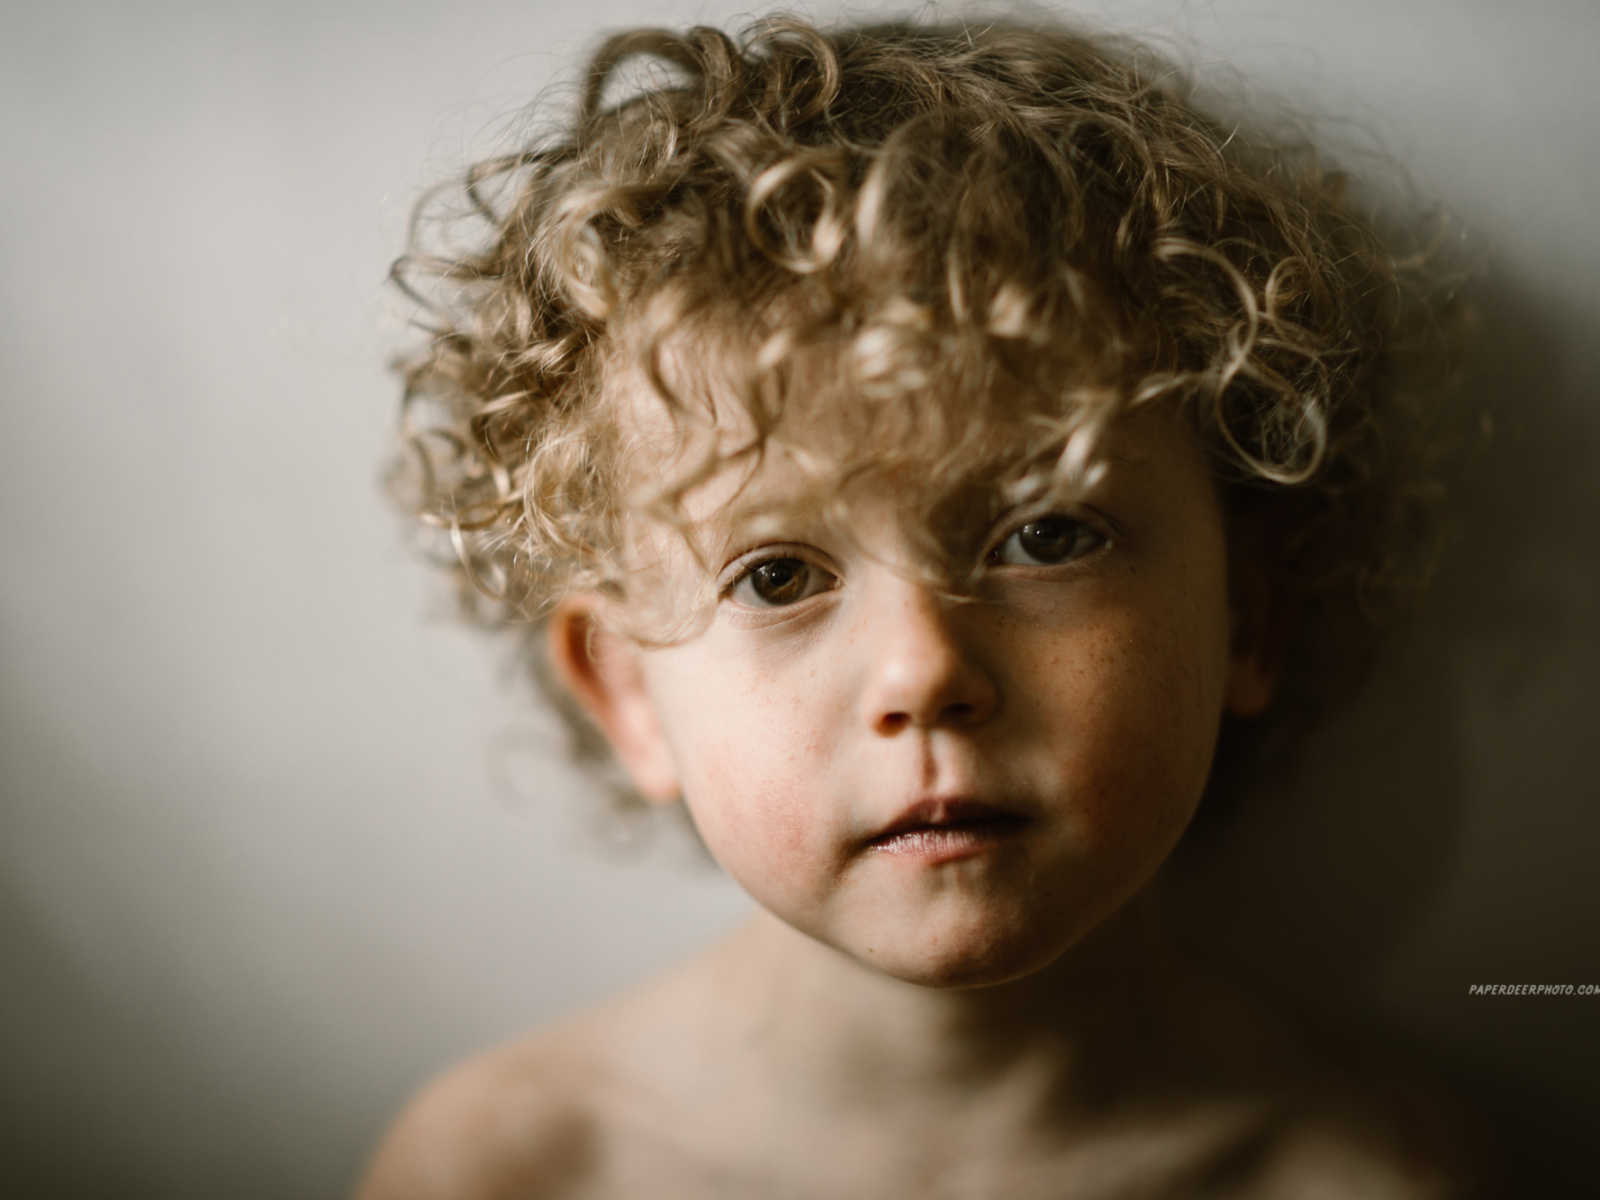 Close up of four year old boy with blonde curly hair who has had two heart surgeries